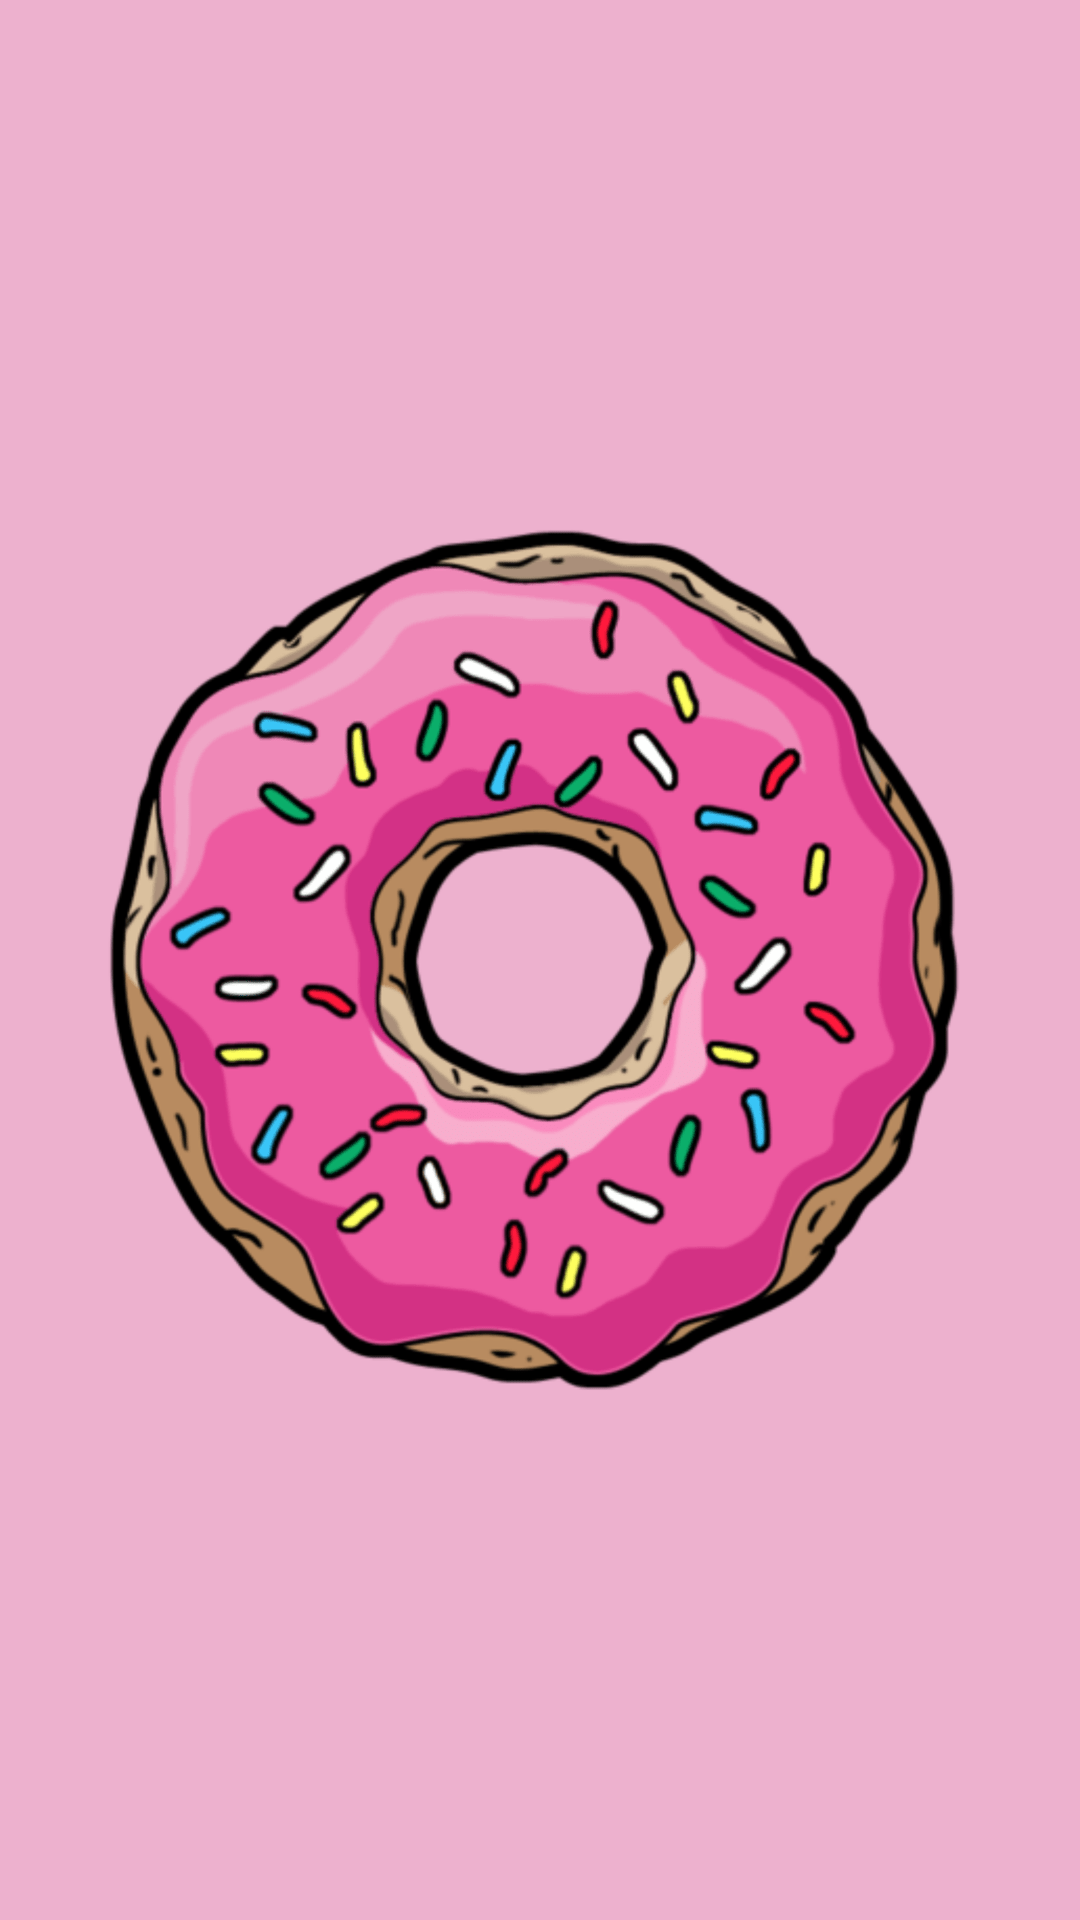 Simpsons Donut iPhone Wallpapers - Top Free Simpsons Donut iPhone ...